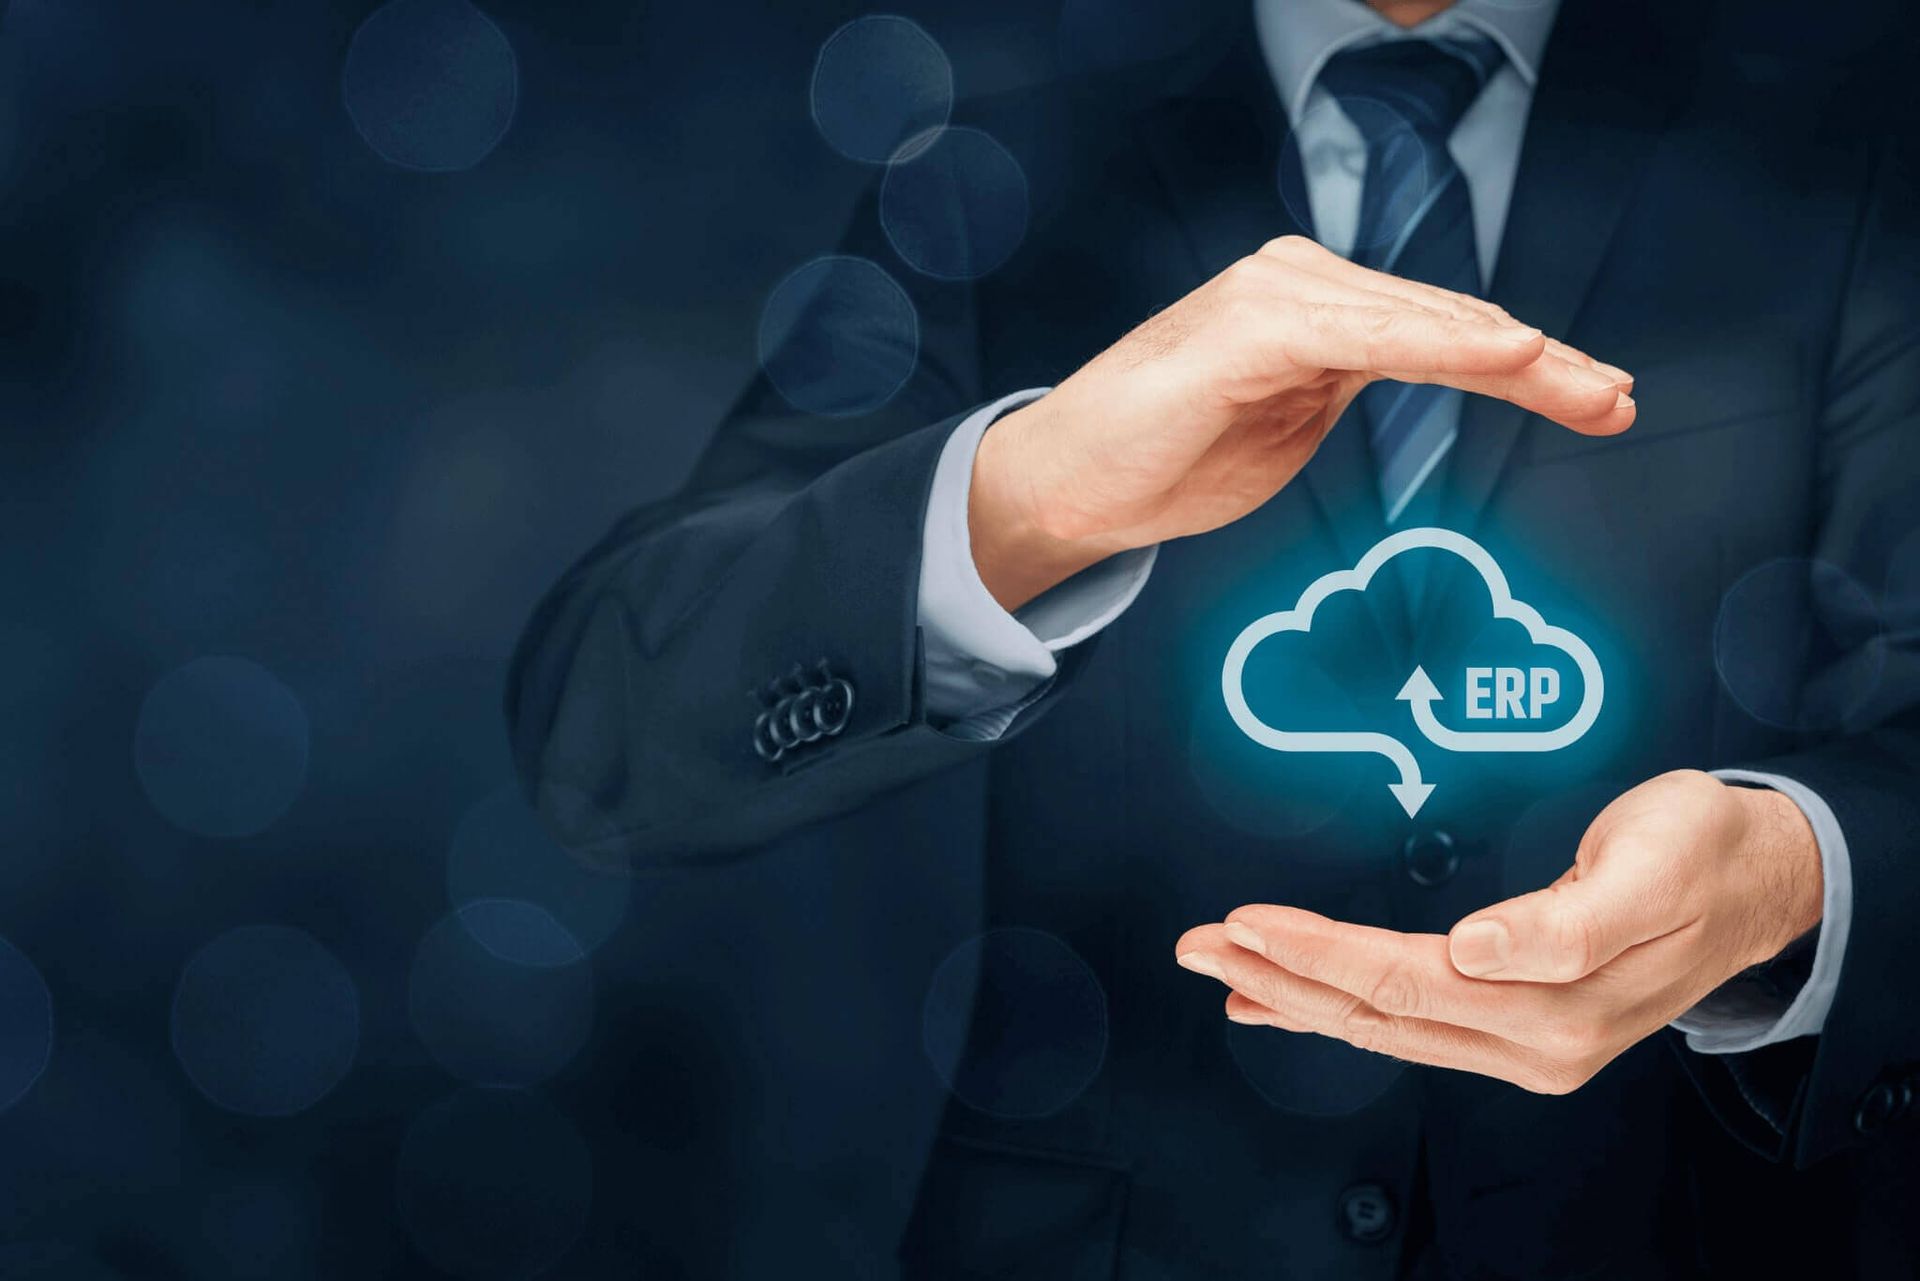 Our business analysts will be connecting ERP system functions with our customers' business needs